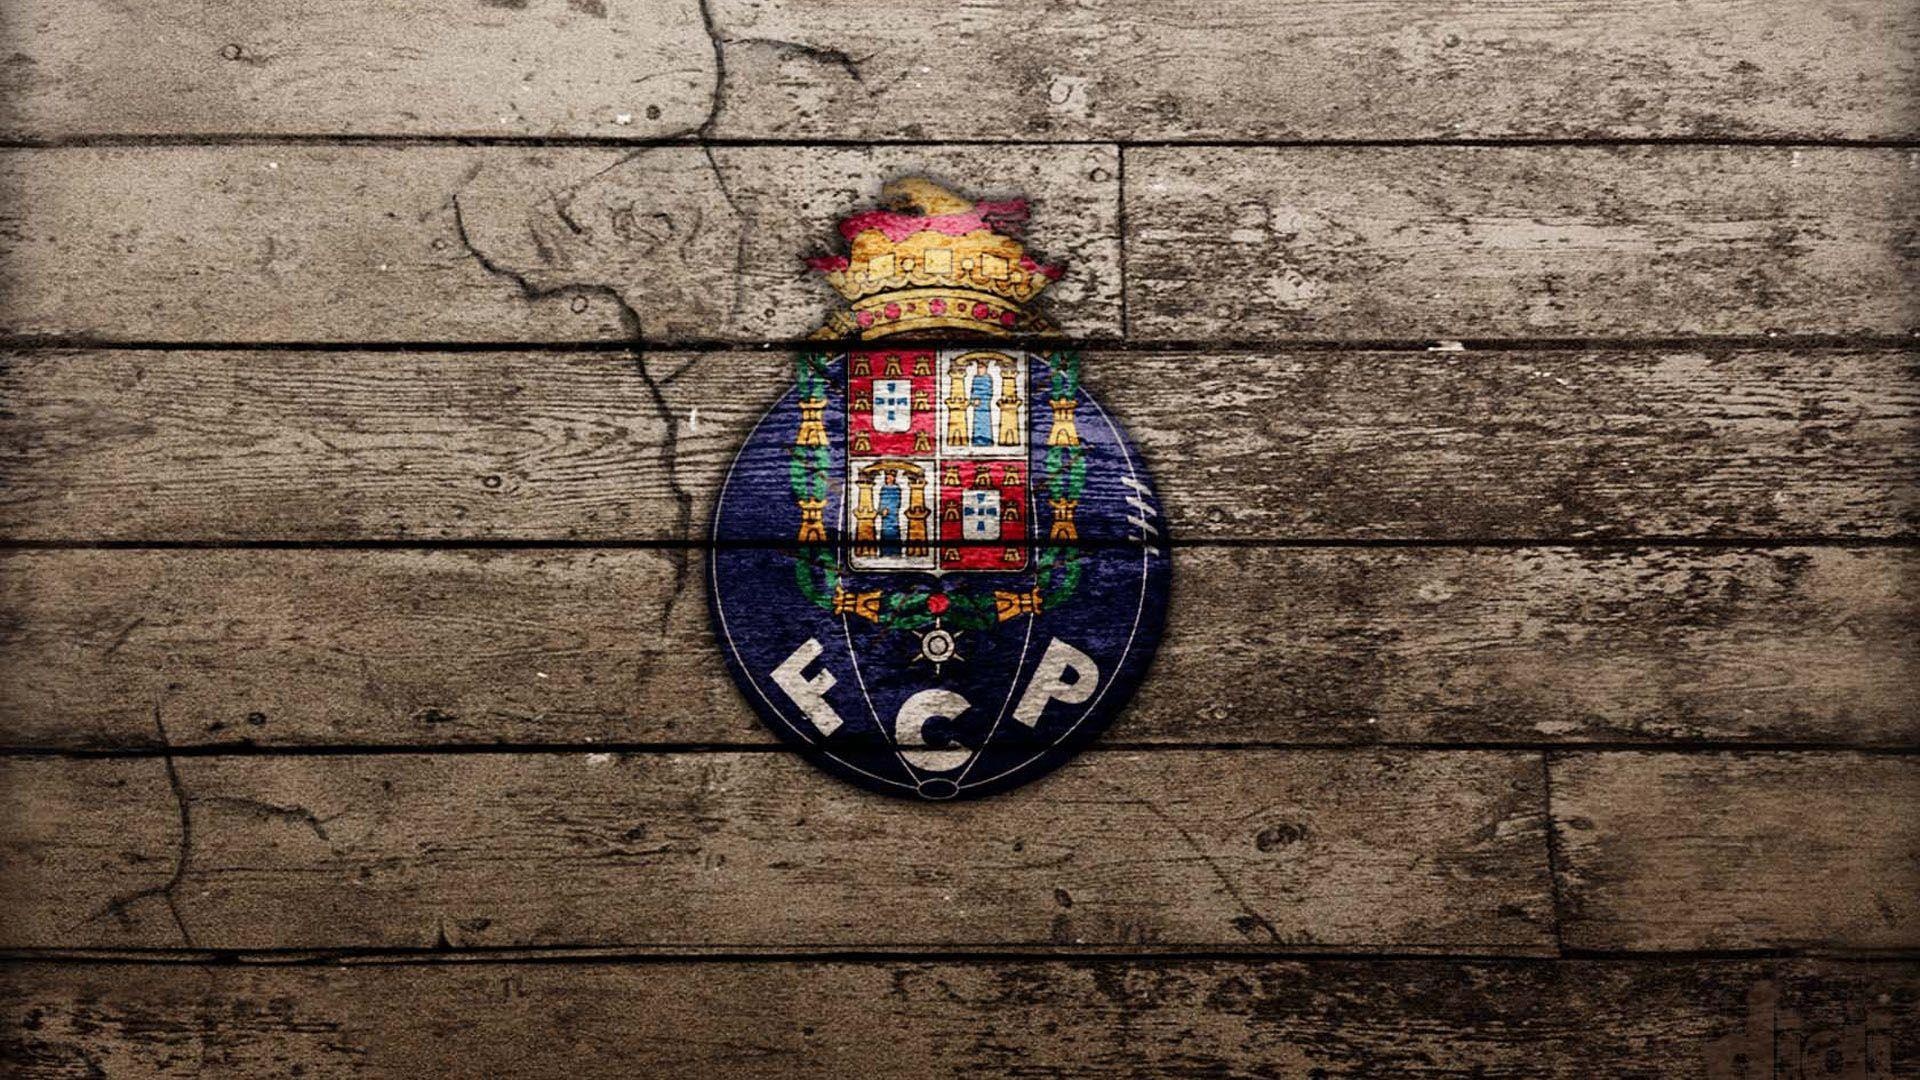 FC Porto: One of the Portuguese ‘Big Three’ – one of three clubs that has never been relegated from the top division since its establishment. 1920x1080 Full HD Background.